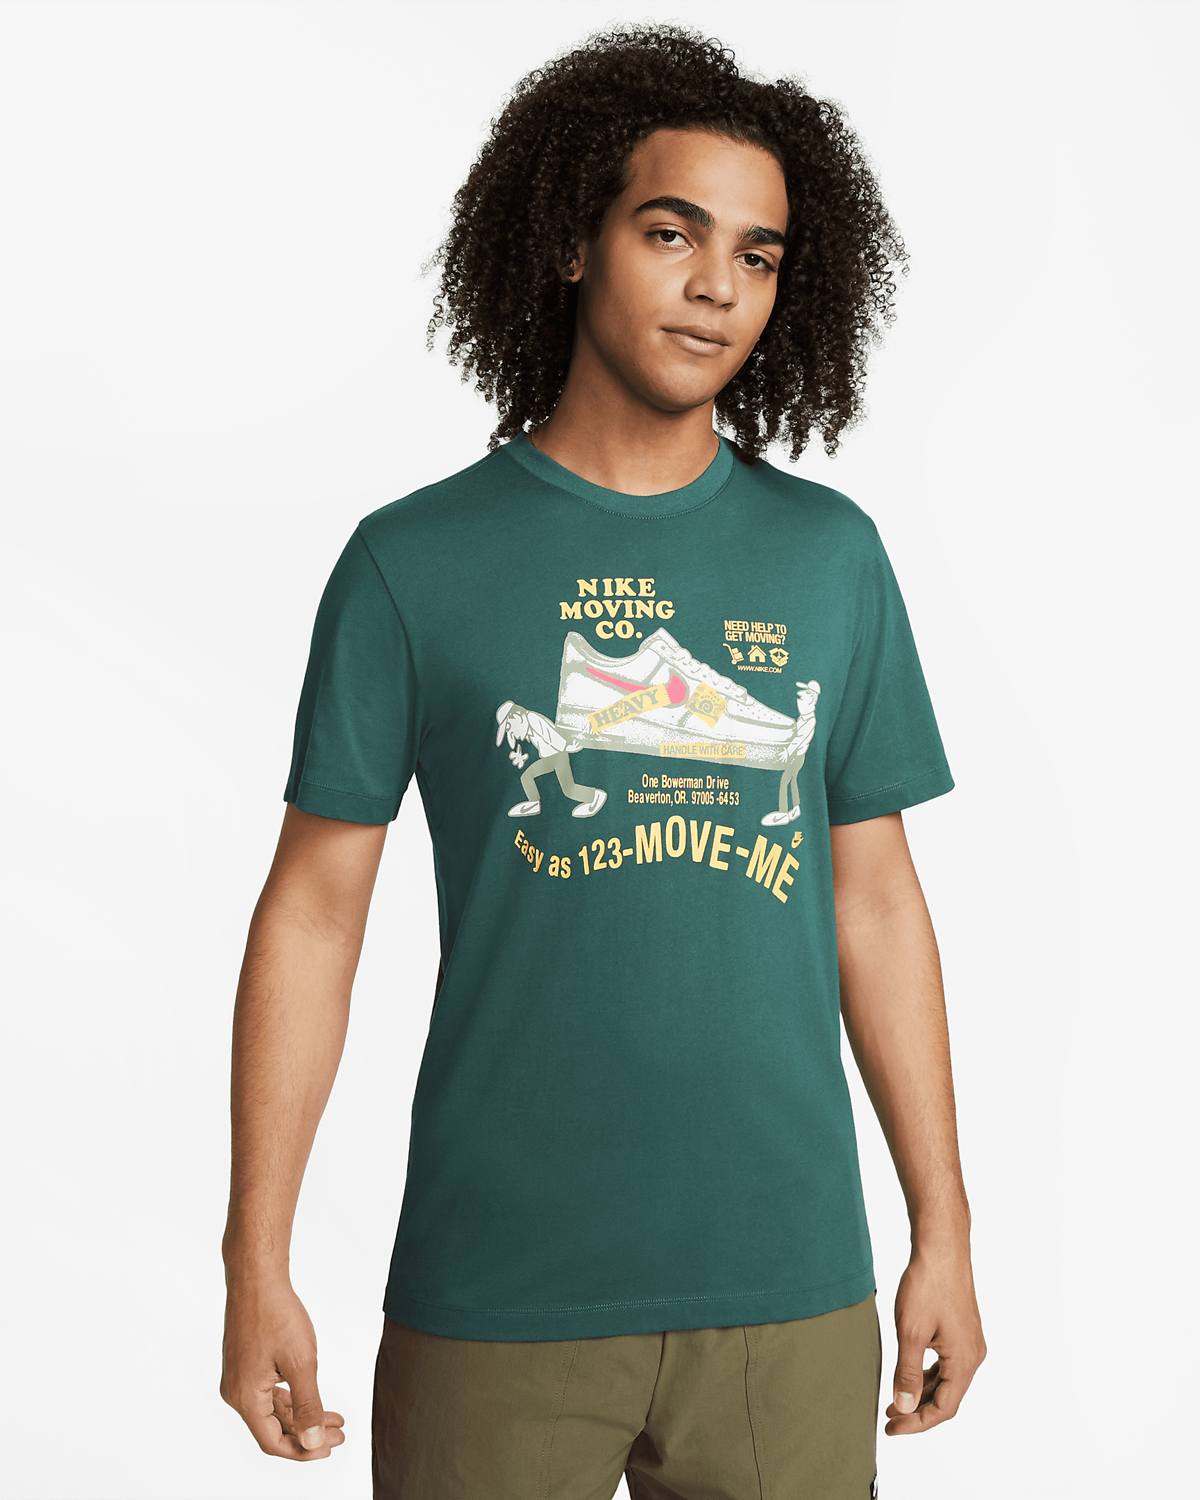 Nike-Moving-Company-T-Shirt-Faded-Spruce